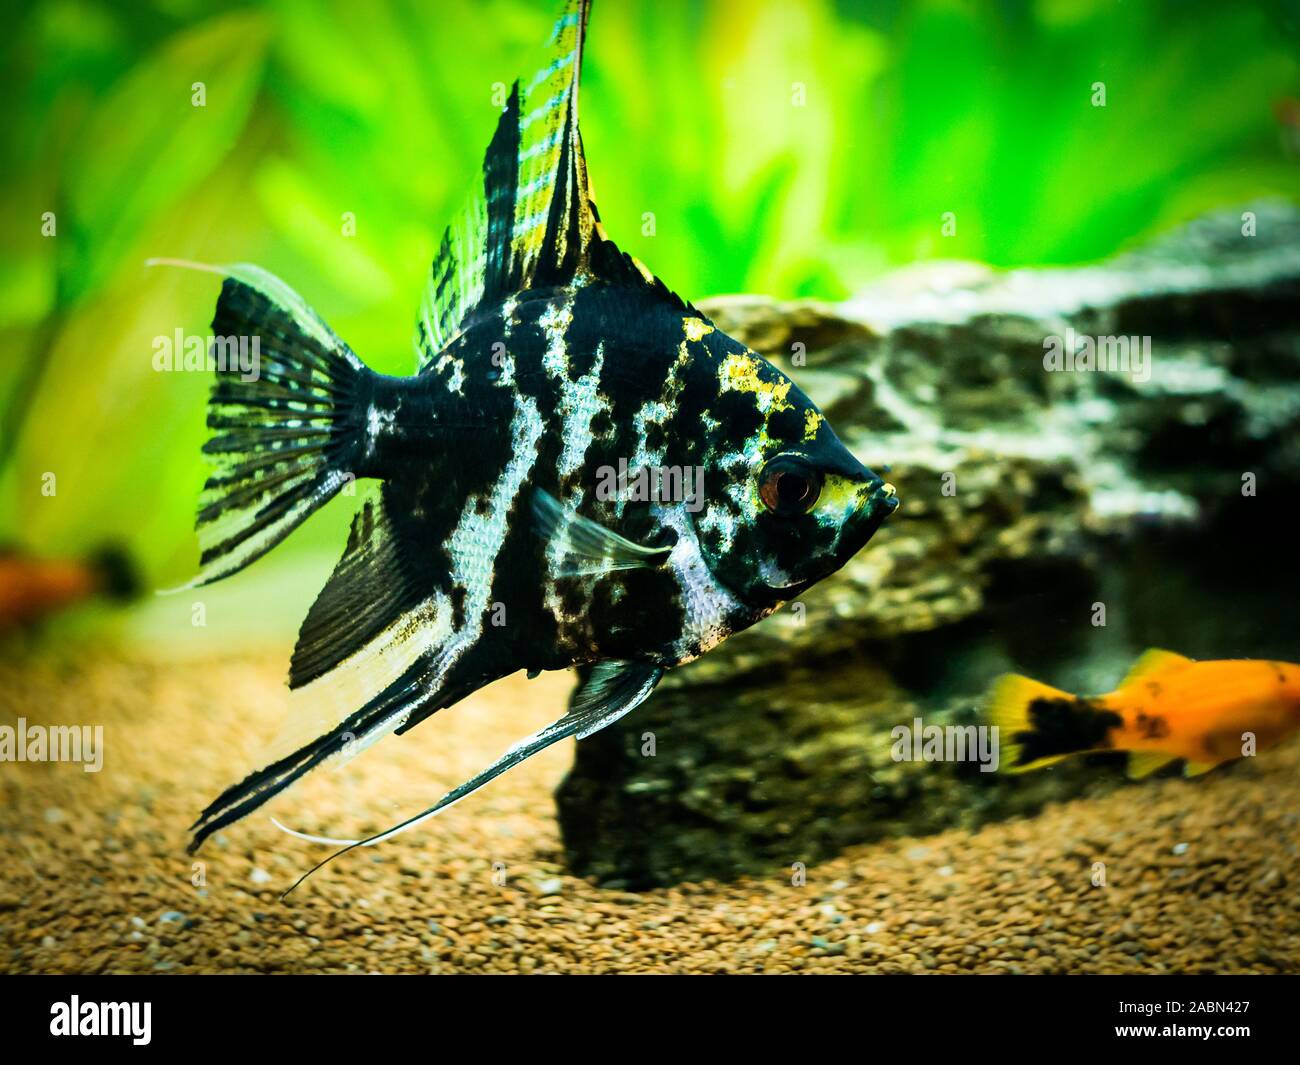 black and white angel fish in a fish tank Stock Photo